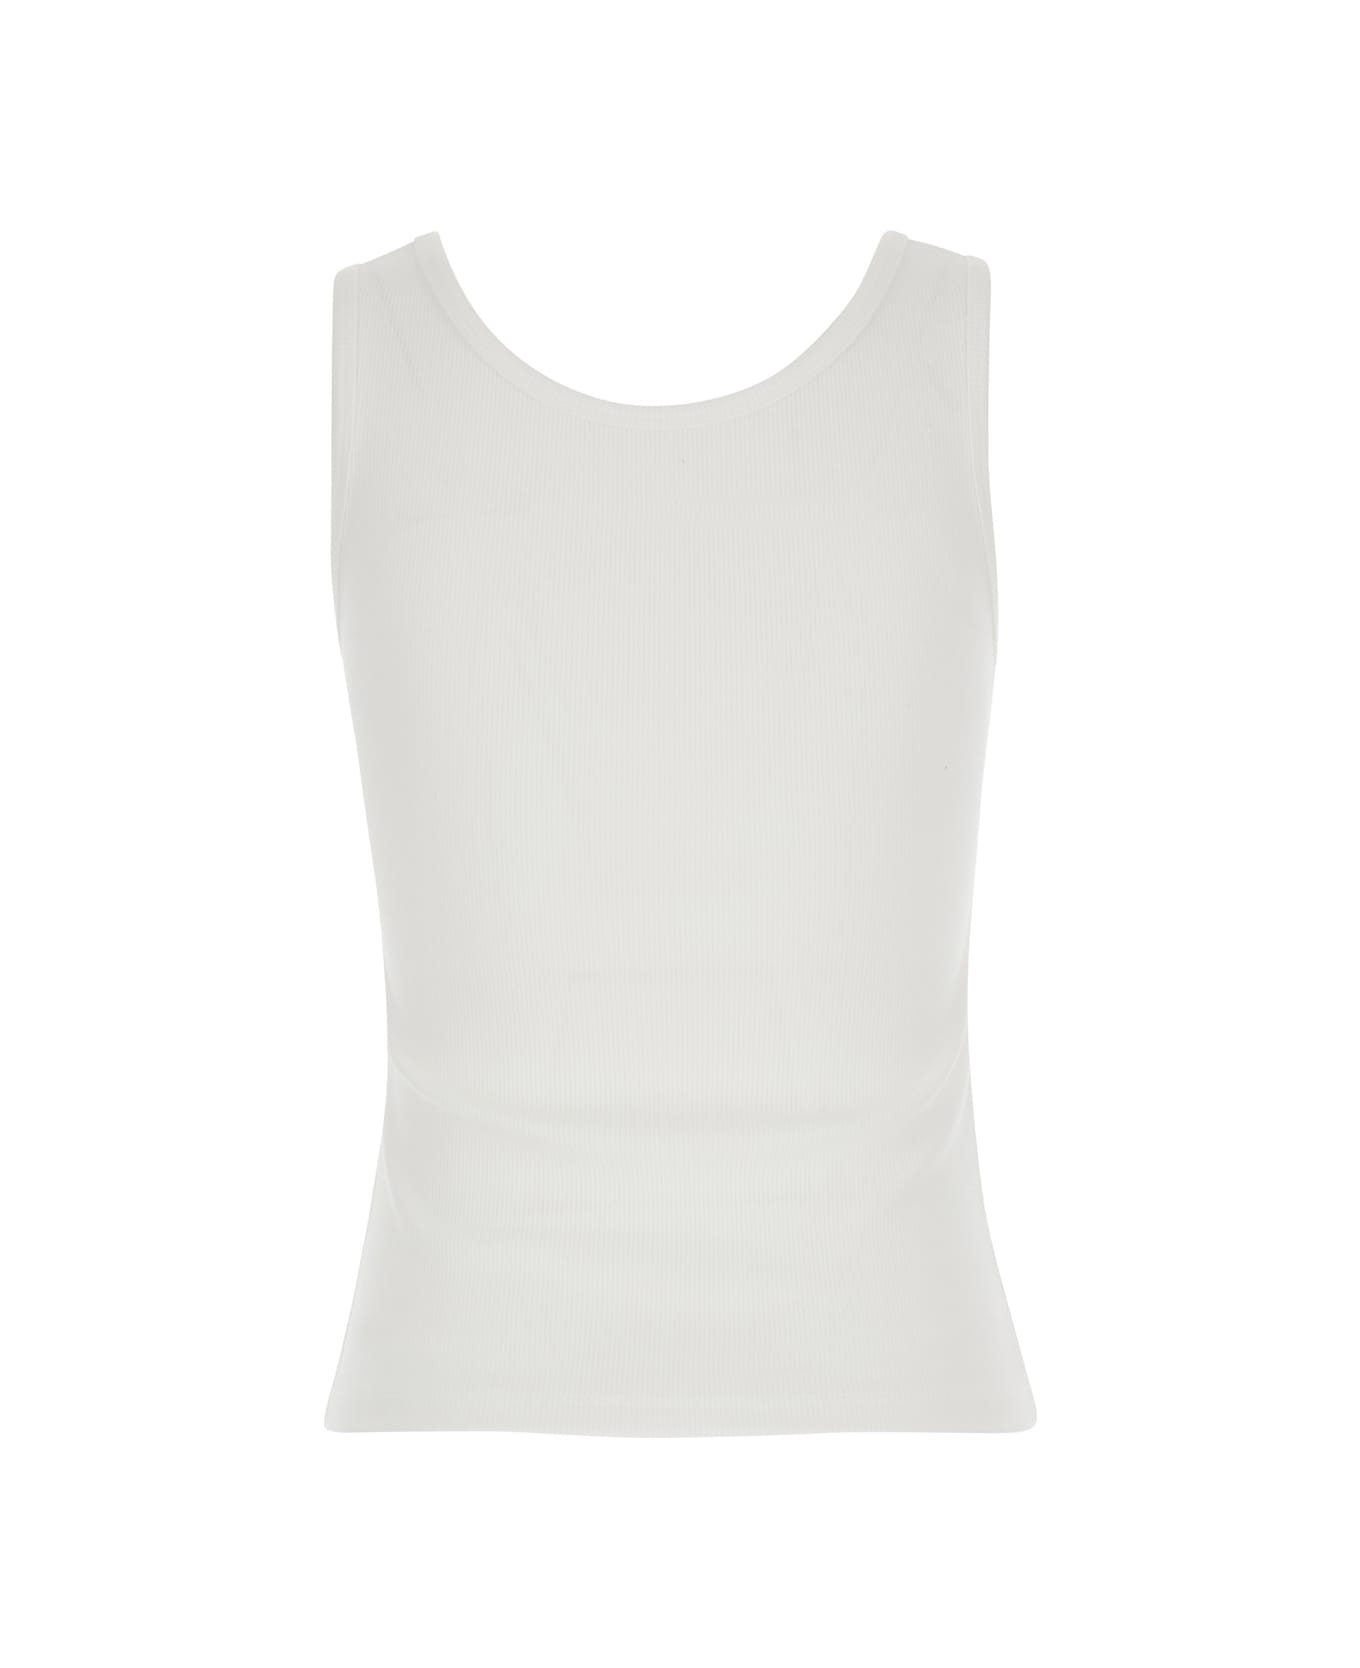 Dunst White Tank Top In Cotton Blend Woman - White タンクトップ